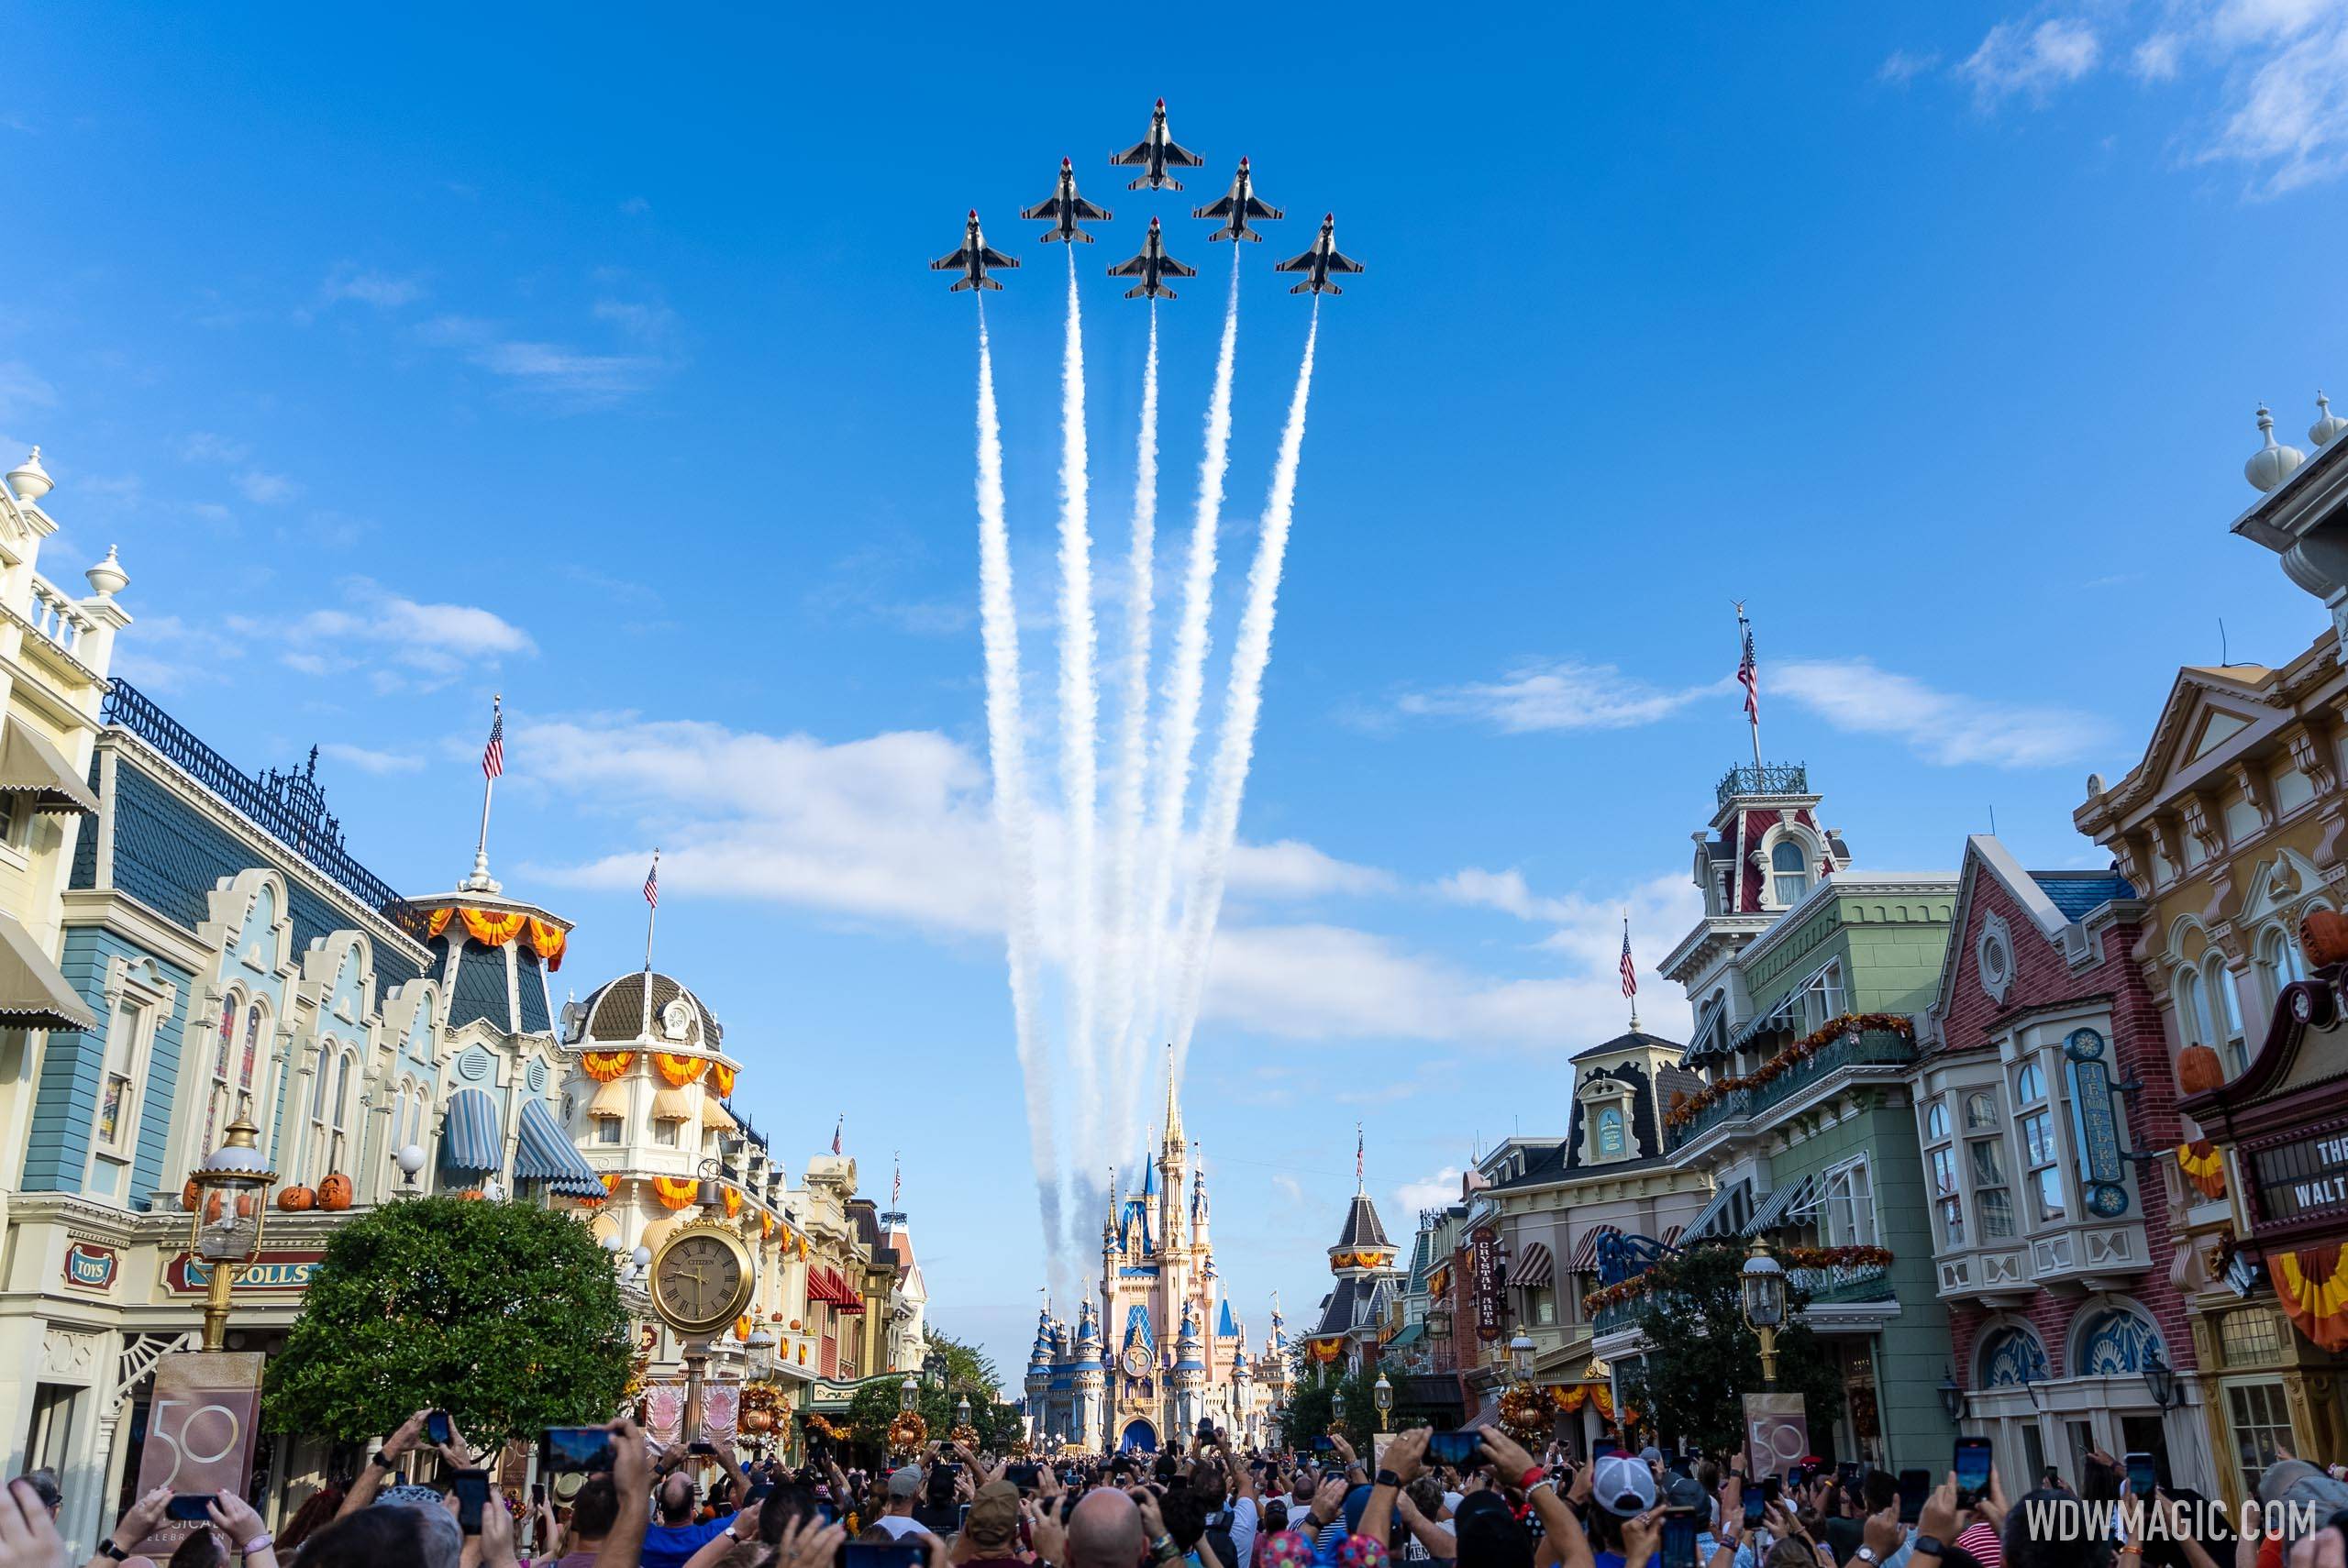 F-35 Lightning II stealth aircraft to take part in U.S. Air Force special flyover at Walt Disney World